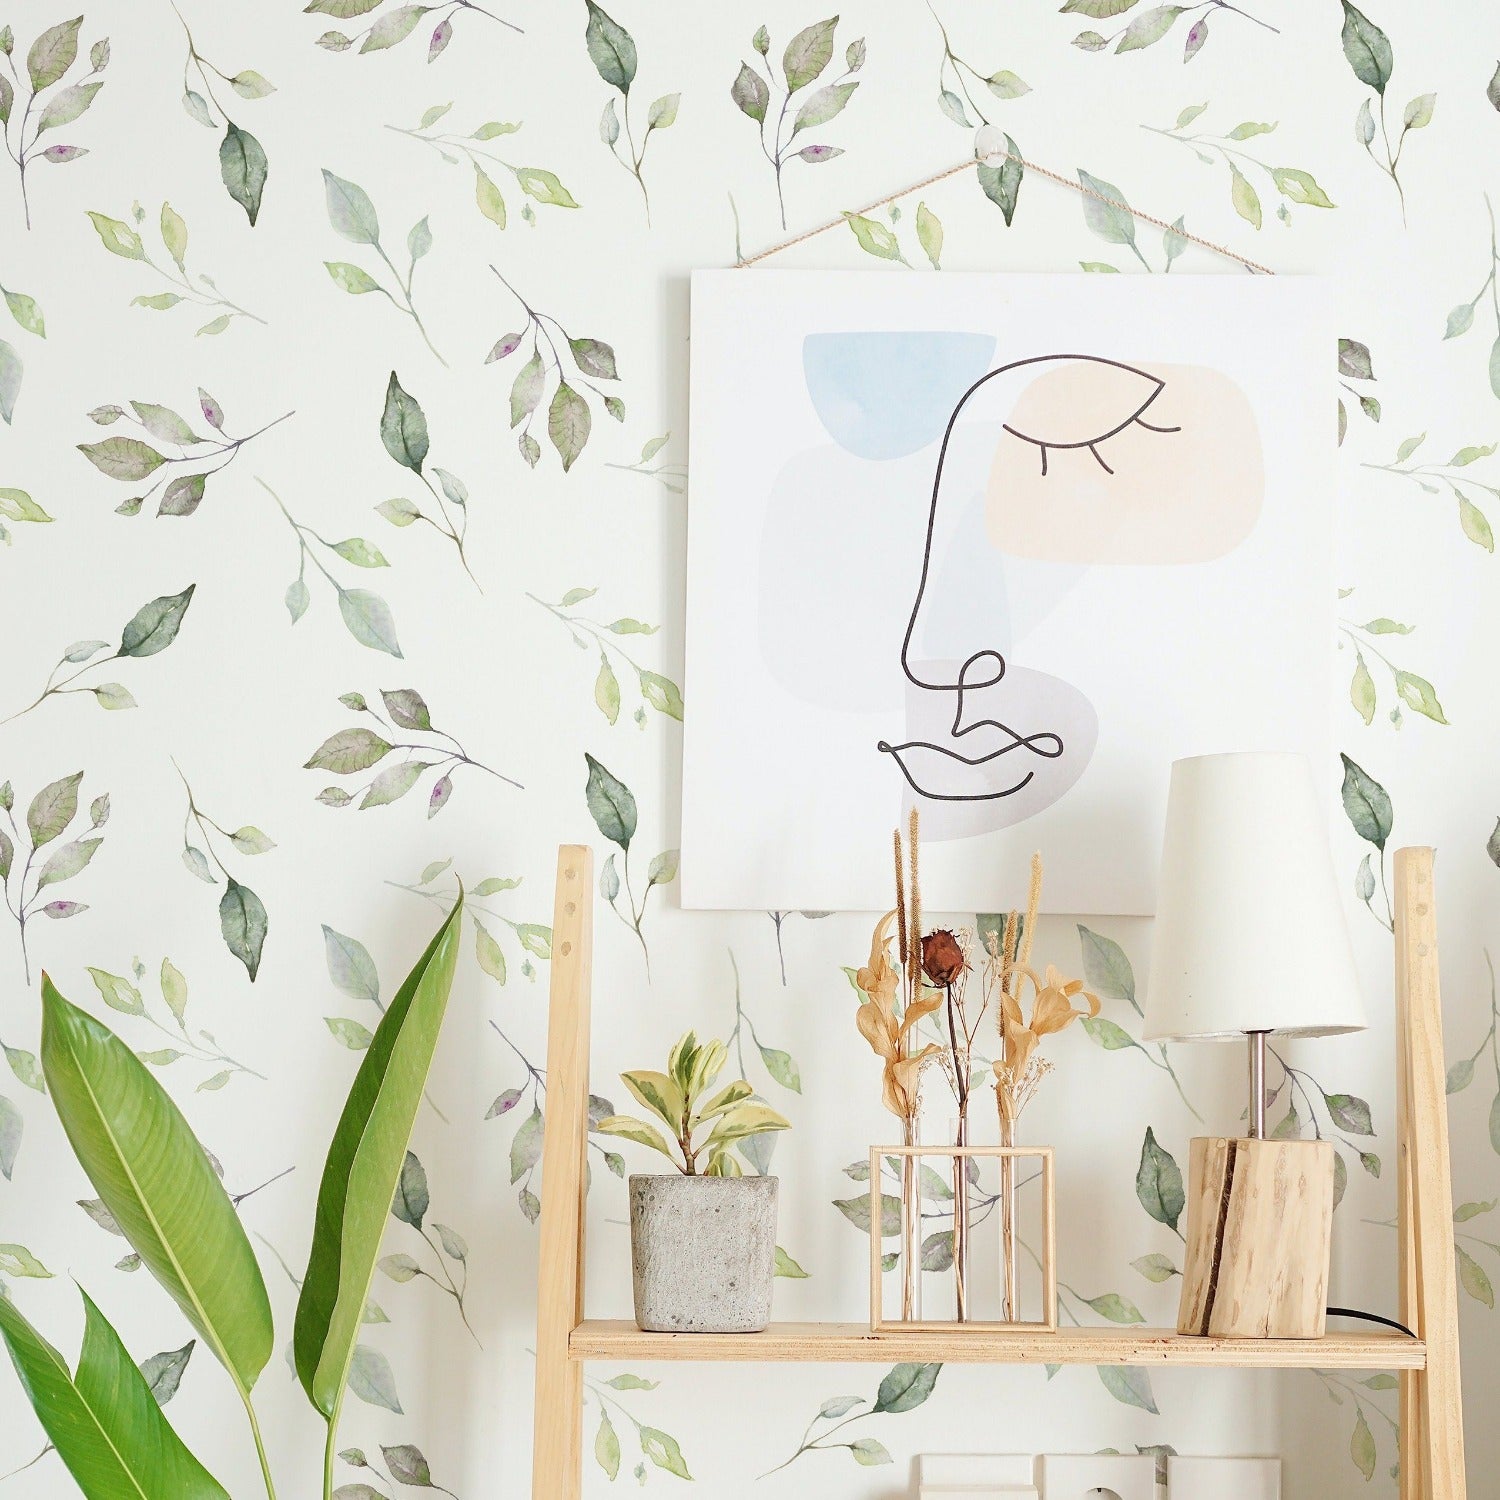 A stylish home workspace with the wall behind featuring 'Fall Floral Wallpaper', a soft watercolor pattern of cascading green leaves. In the foreground, a wooden shelf holds an abstract face drawing, a potted plant, and a table lamp, creating a tranquil and creative atmosphere.